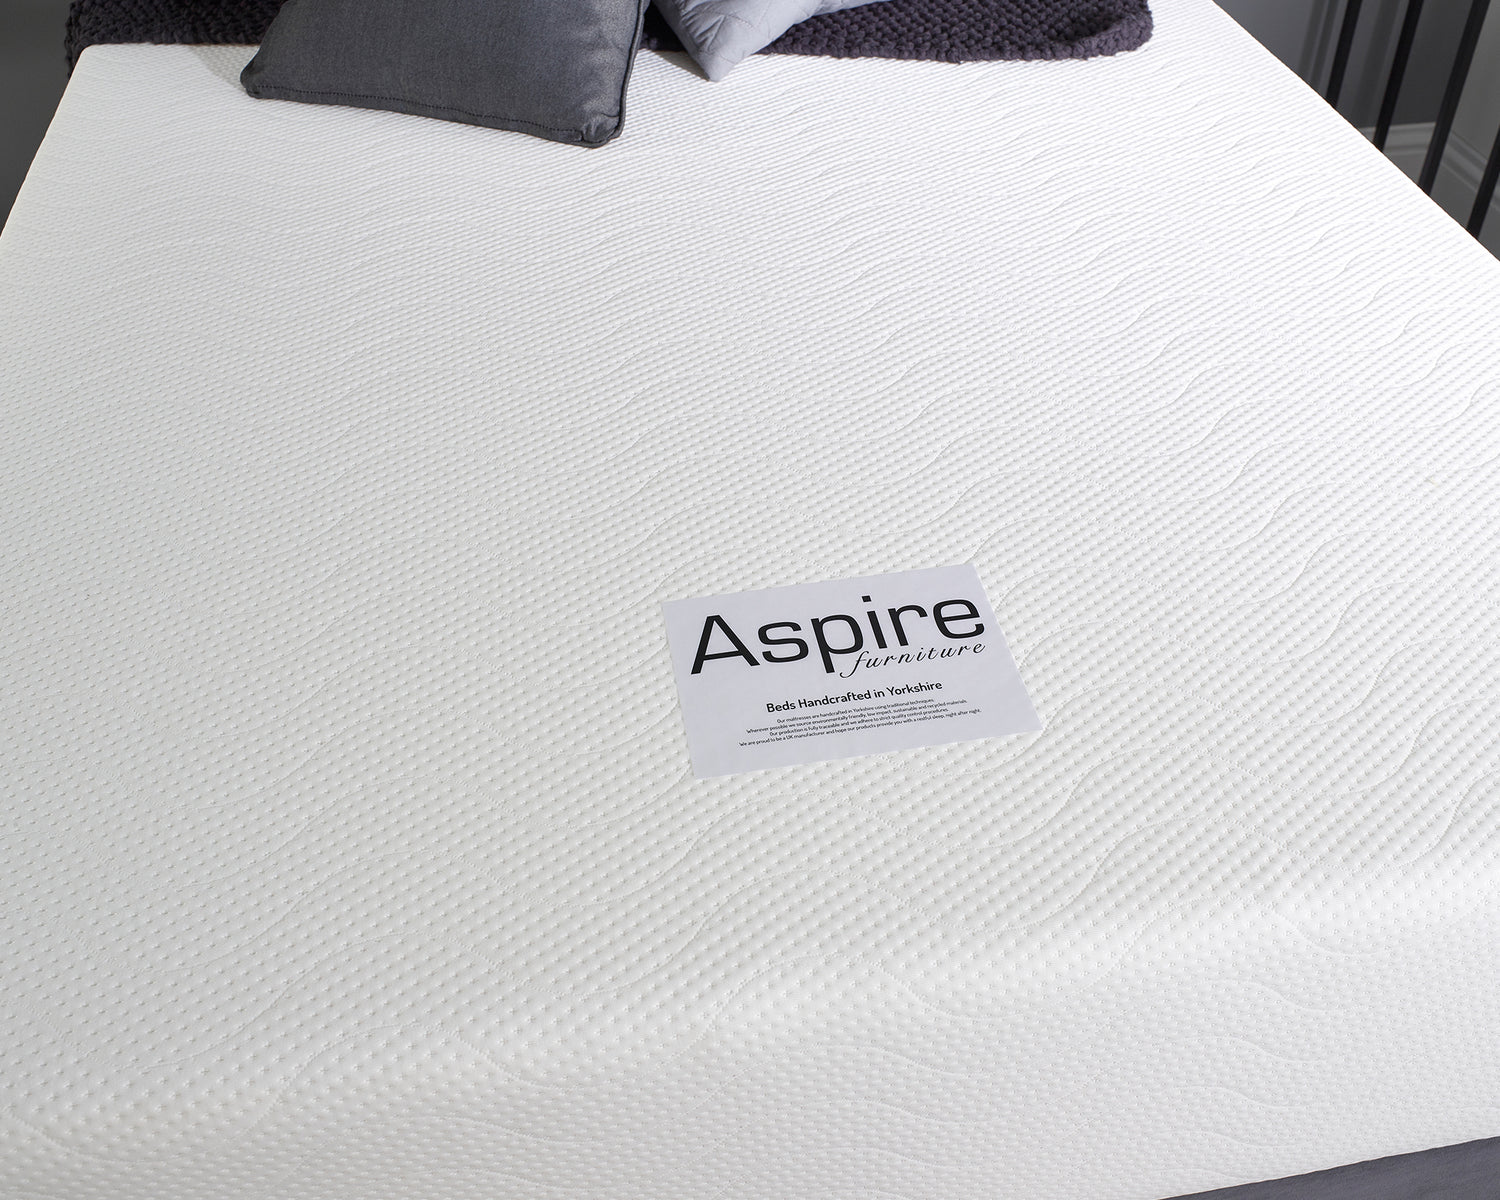 Aspire Cashmere 5000 Pocket Mattress From Top View-Better Bed Company 